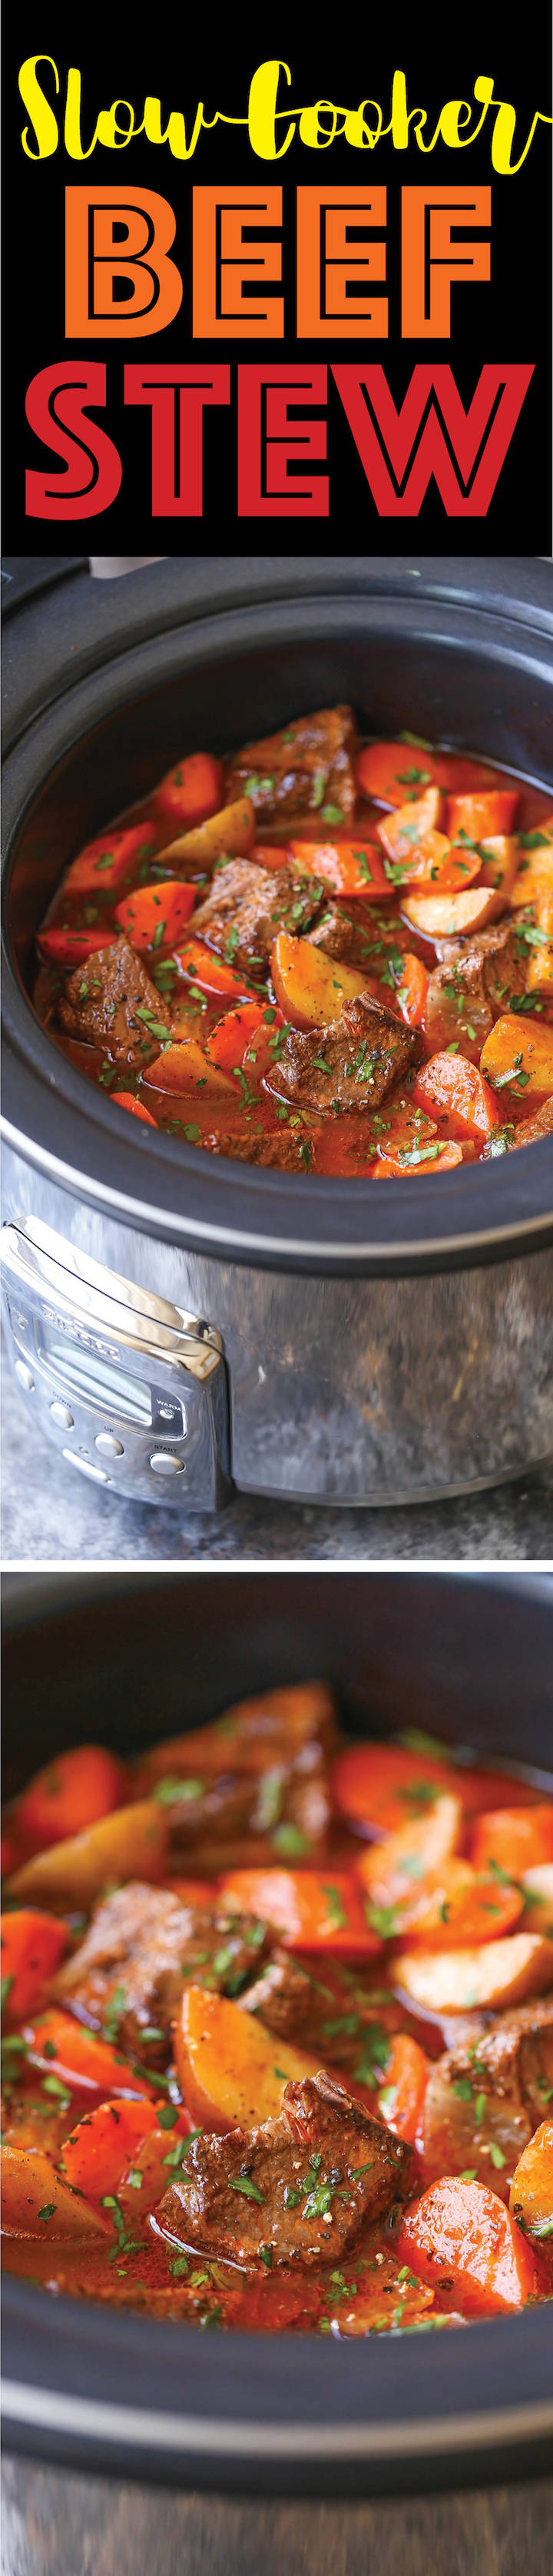 Slow Cooker Beef Stew - Everyone's favorite comforting beef stew made easily in the crockpot! The meat is SO TENDER and the stew is rich, chunky and hearty!